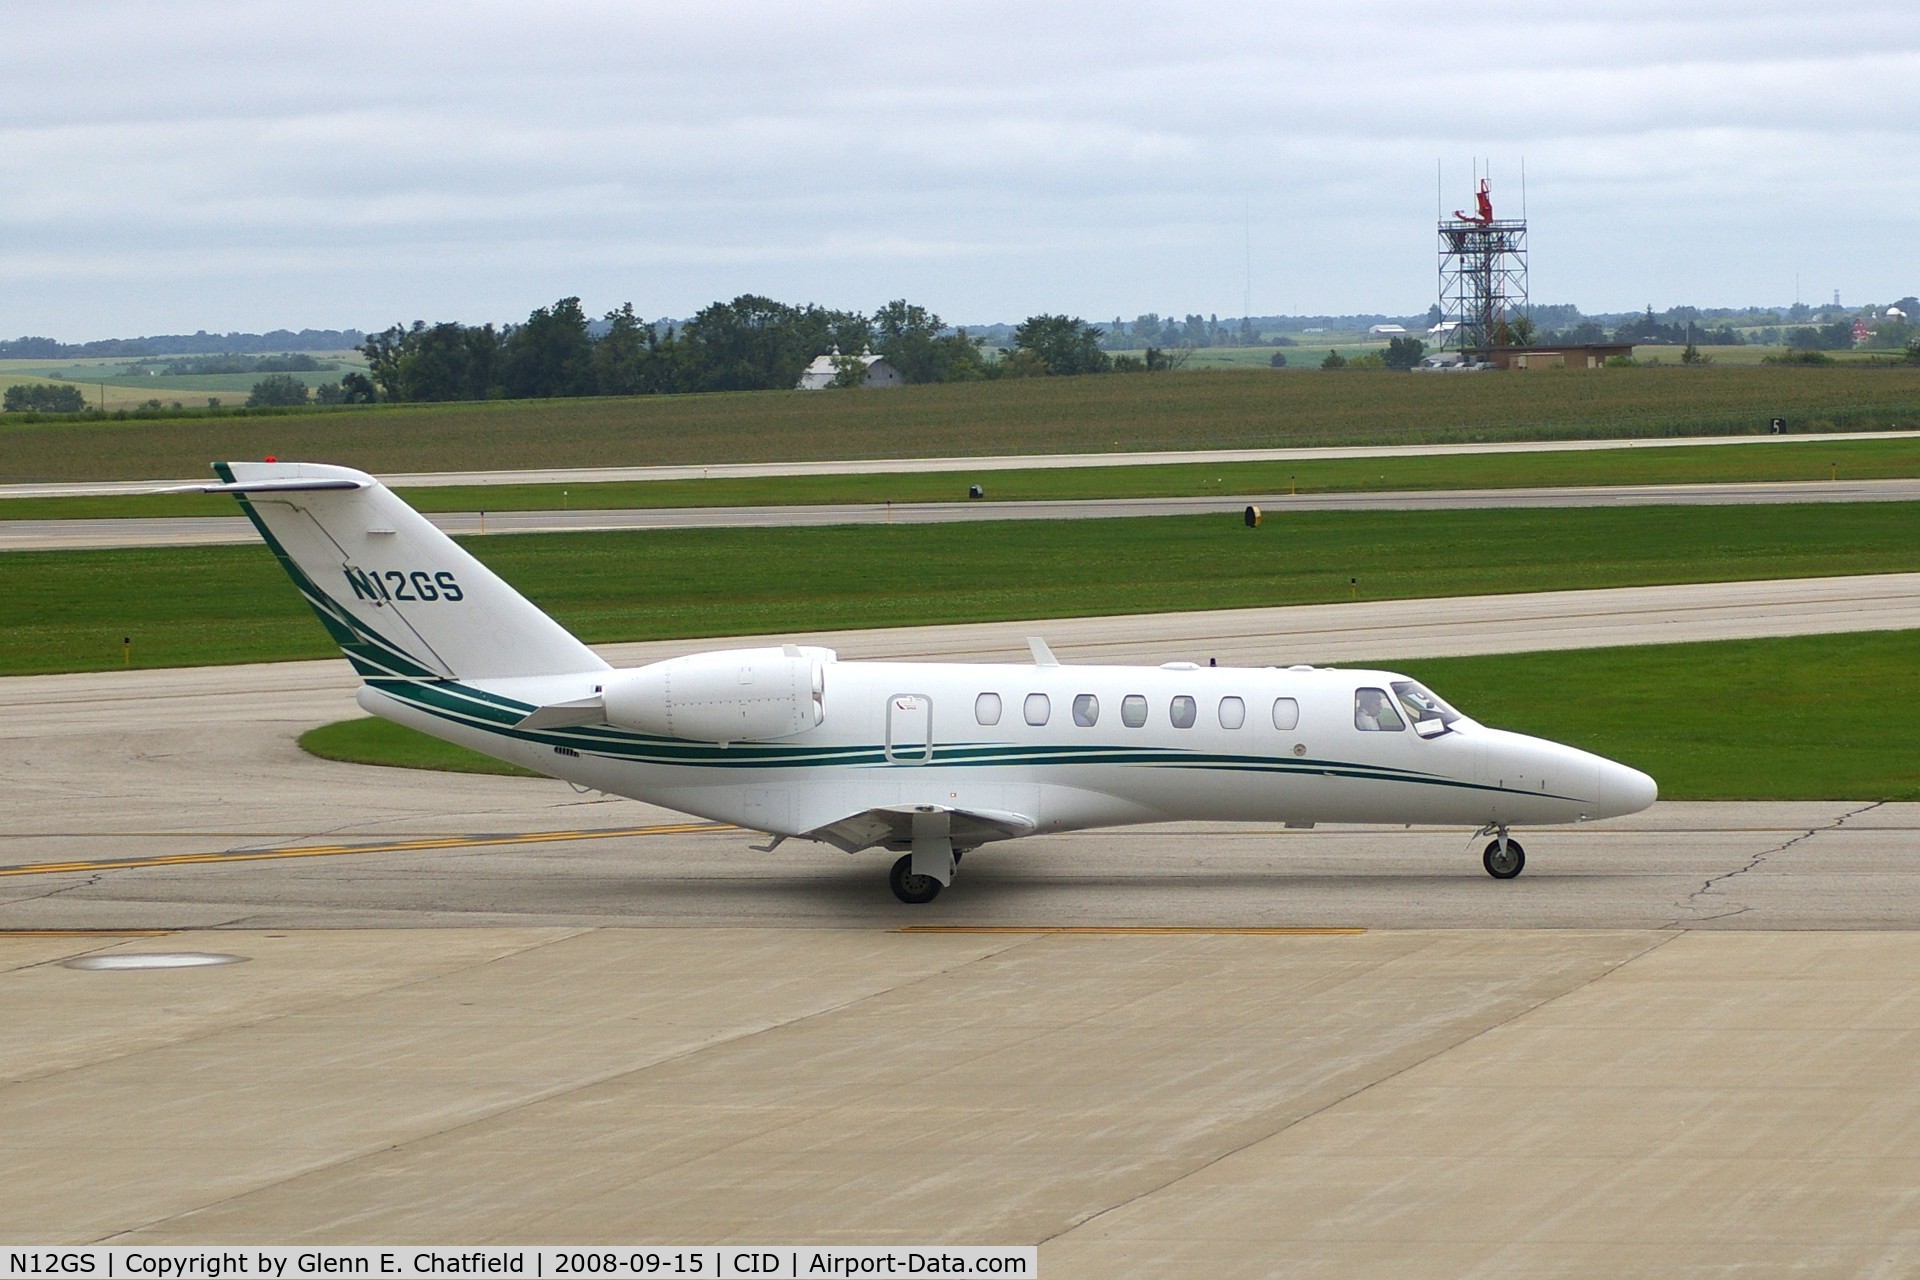 N12GS, 2006 Cessna 525B CitationJet CJ3 C/N 525B0122, Taxiing on Alpha to the ramp.  Looking through my dirty window.